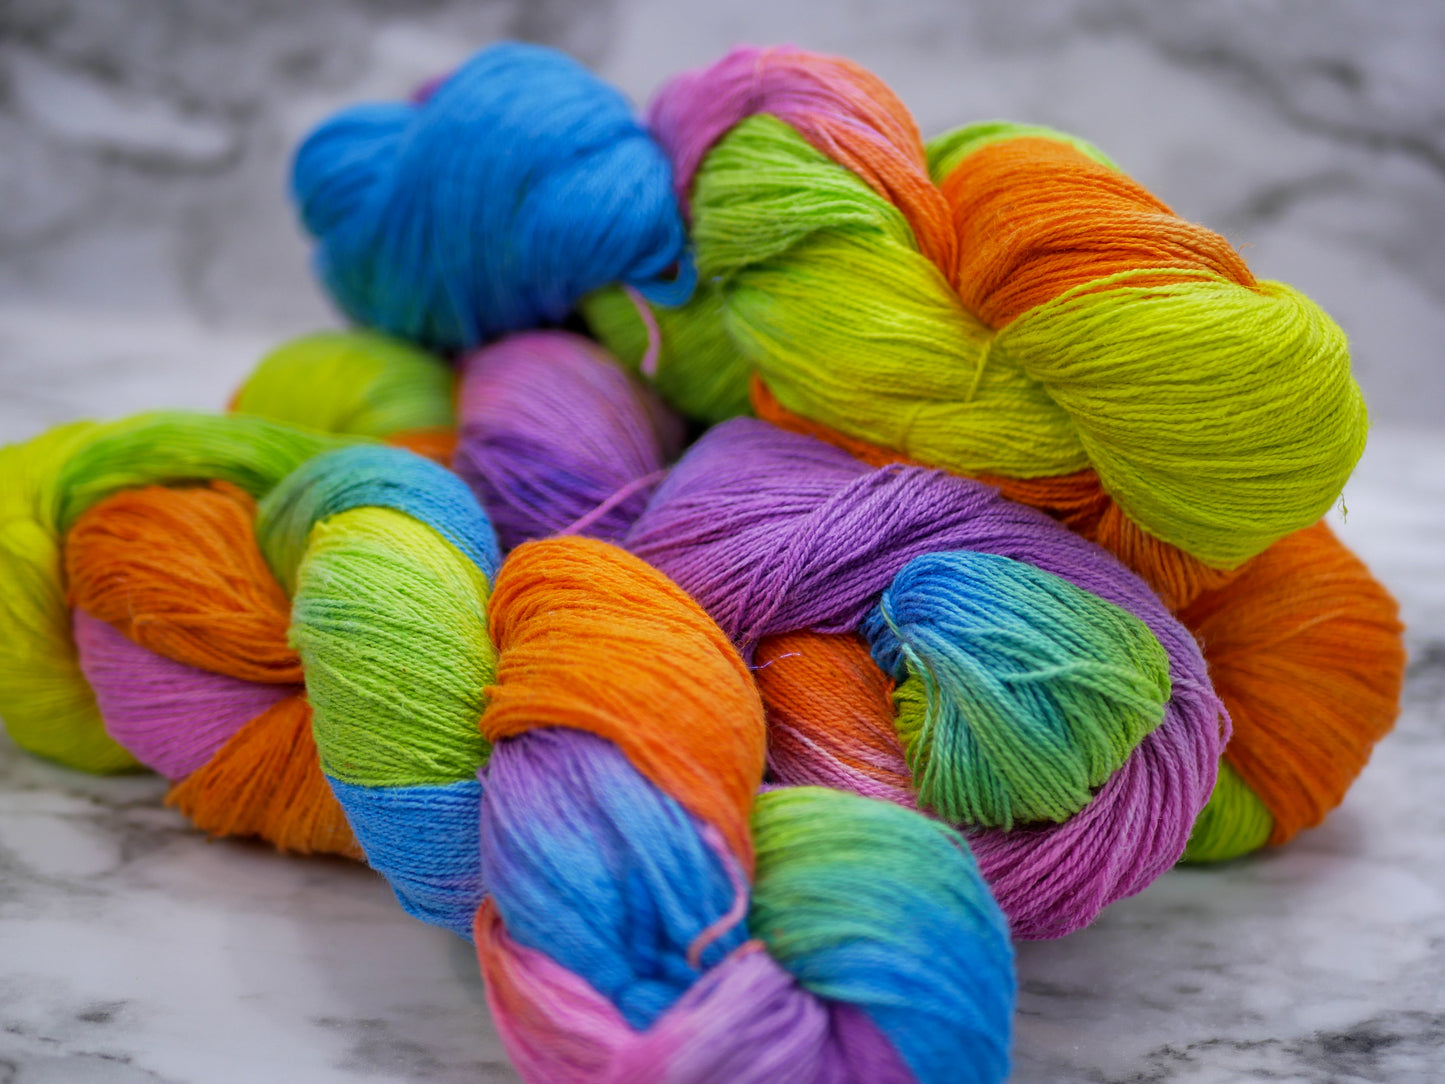 100g Skein - Handpainted Hemp/Organic Cotton - Dyed for pooling